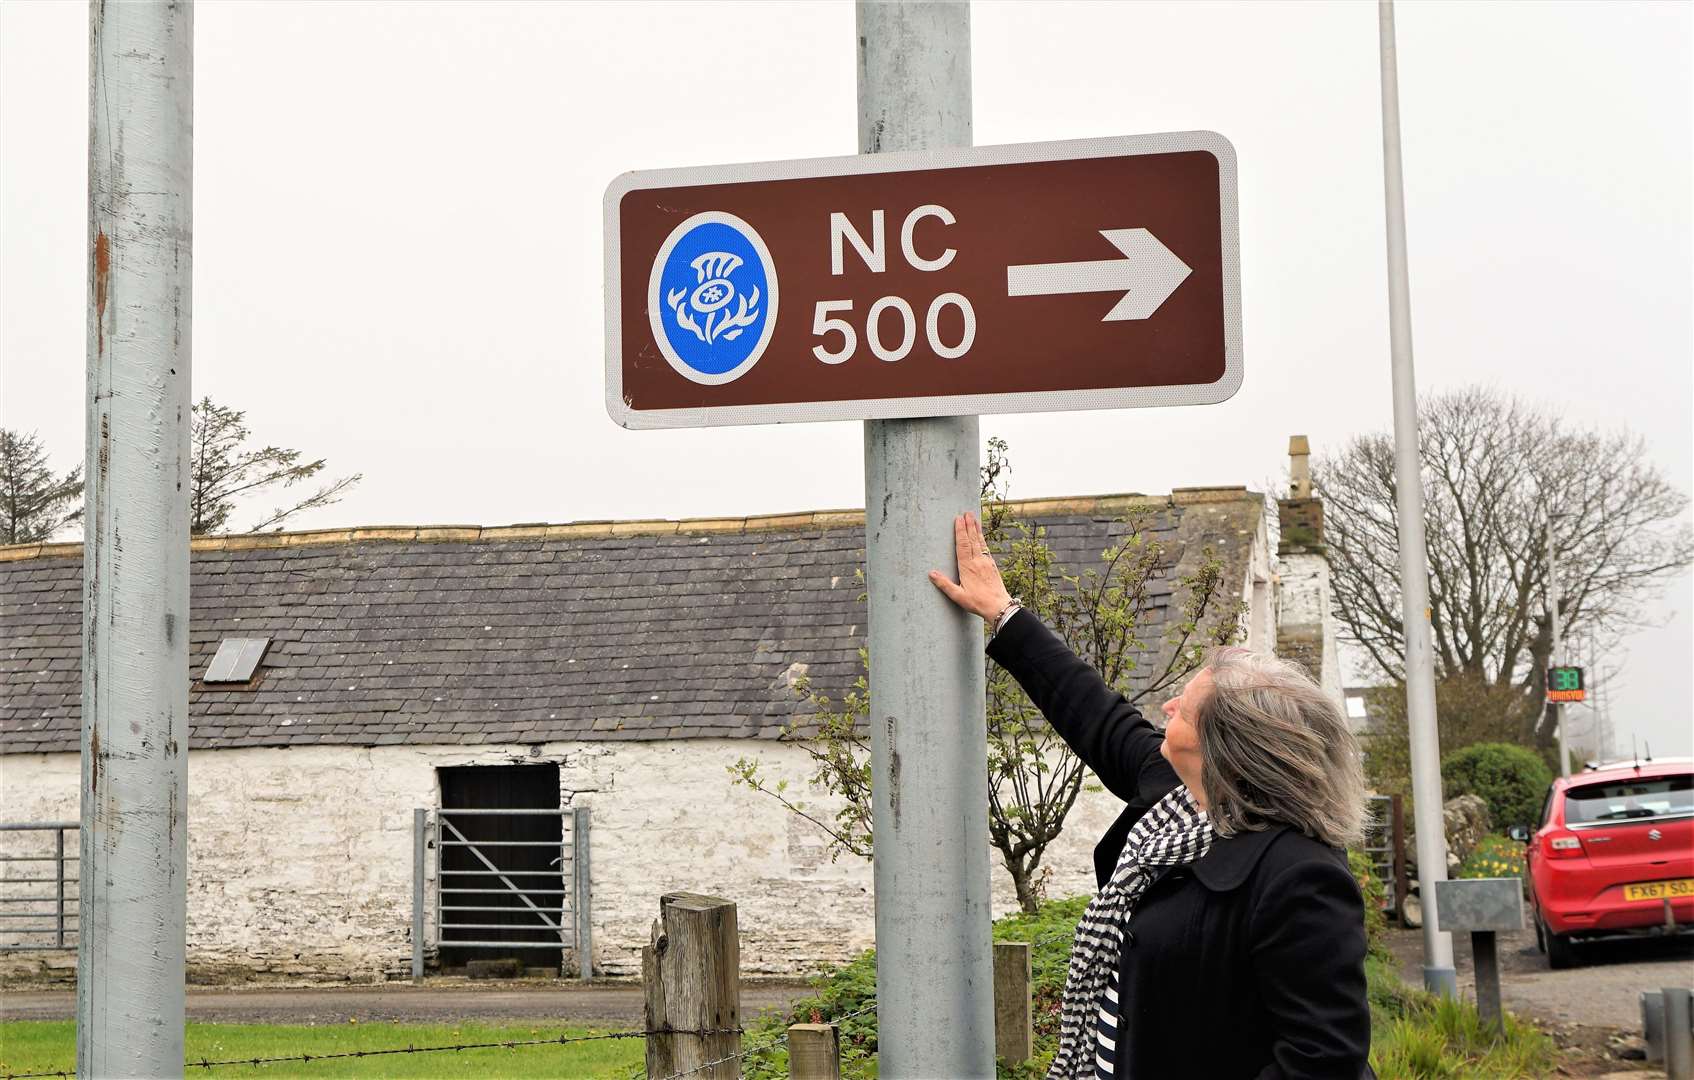 The signs for the NC500 tourist route need to be prominently displayed says the councillor. Picture: DGS